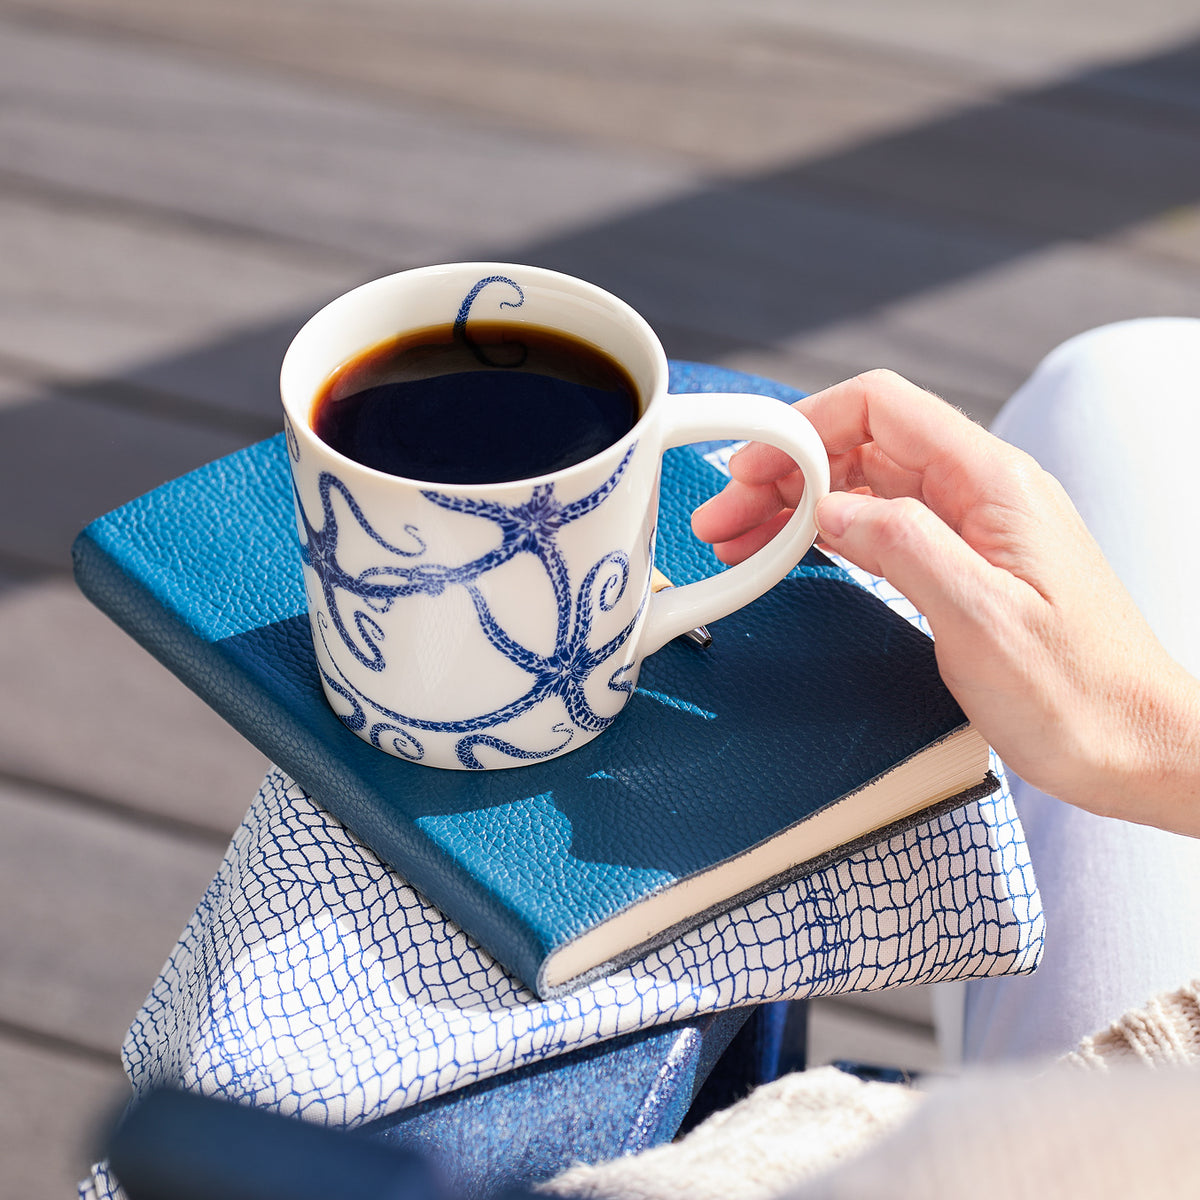 A person holding a Caskata Artisanal Home Starfish Mug filled with coffee, placed on top of two closed blue notebooks. The sturdy and stylish dishwasher-safe mug adds a touch of coastal charm to any moment.